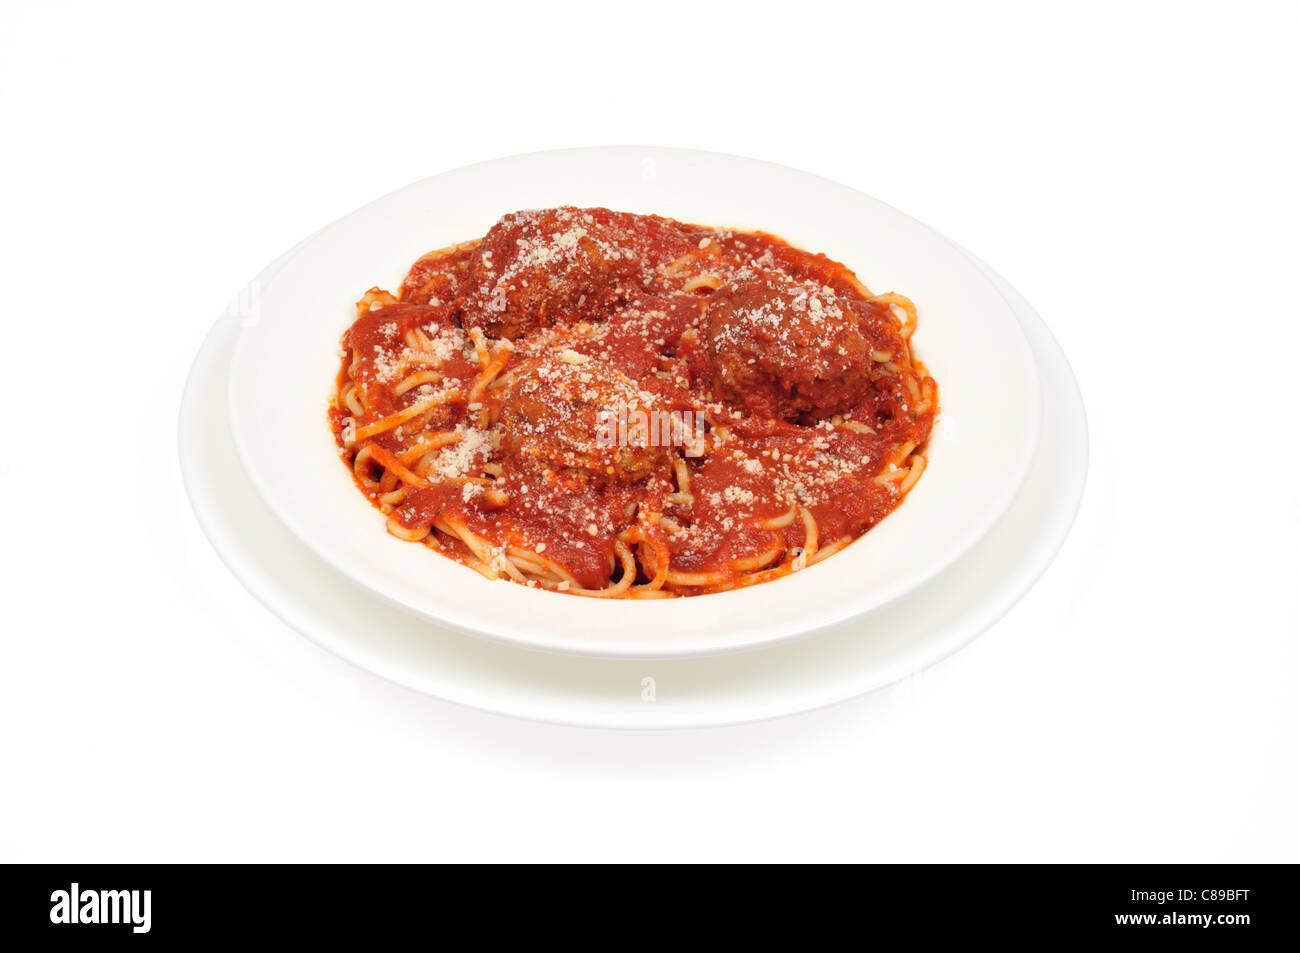 Bowl of spaghetti and meatballs with tomato sauce on white background,cut out. Stock Photo